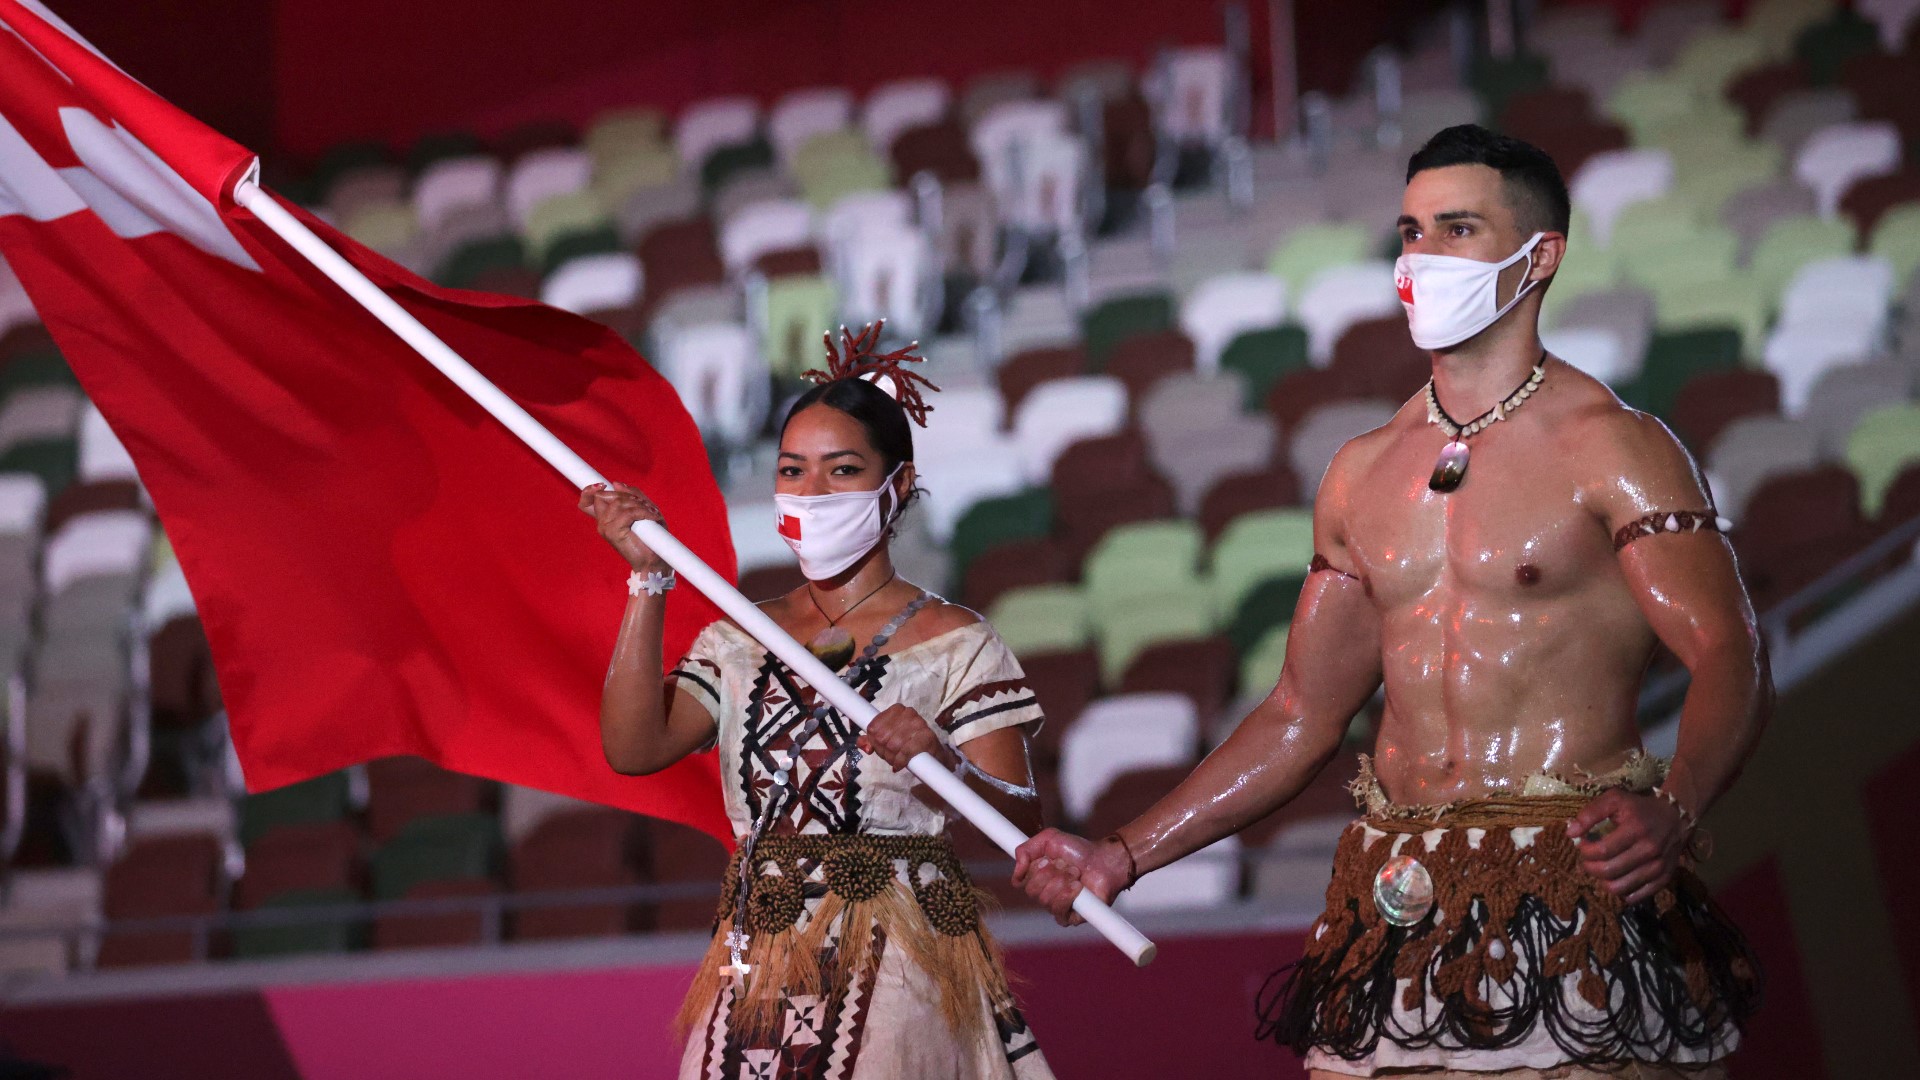 After making a splash at the 2018 Winter Olympics Opening Ceremony, the shirtless flag bearer from Tonga, Pita Taufatofua, is back at the 2020 Tokyo Olympics.